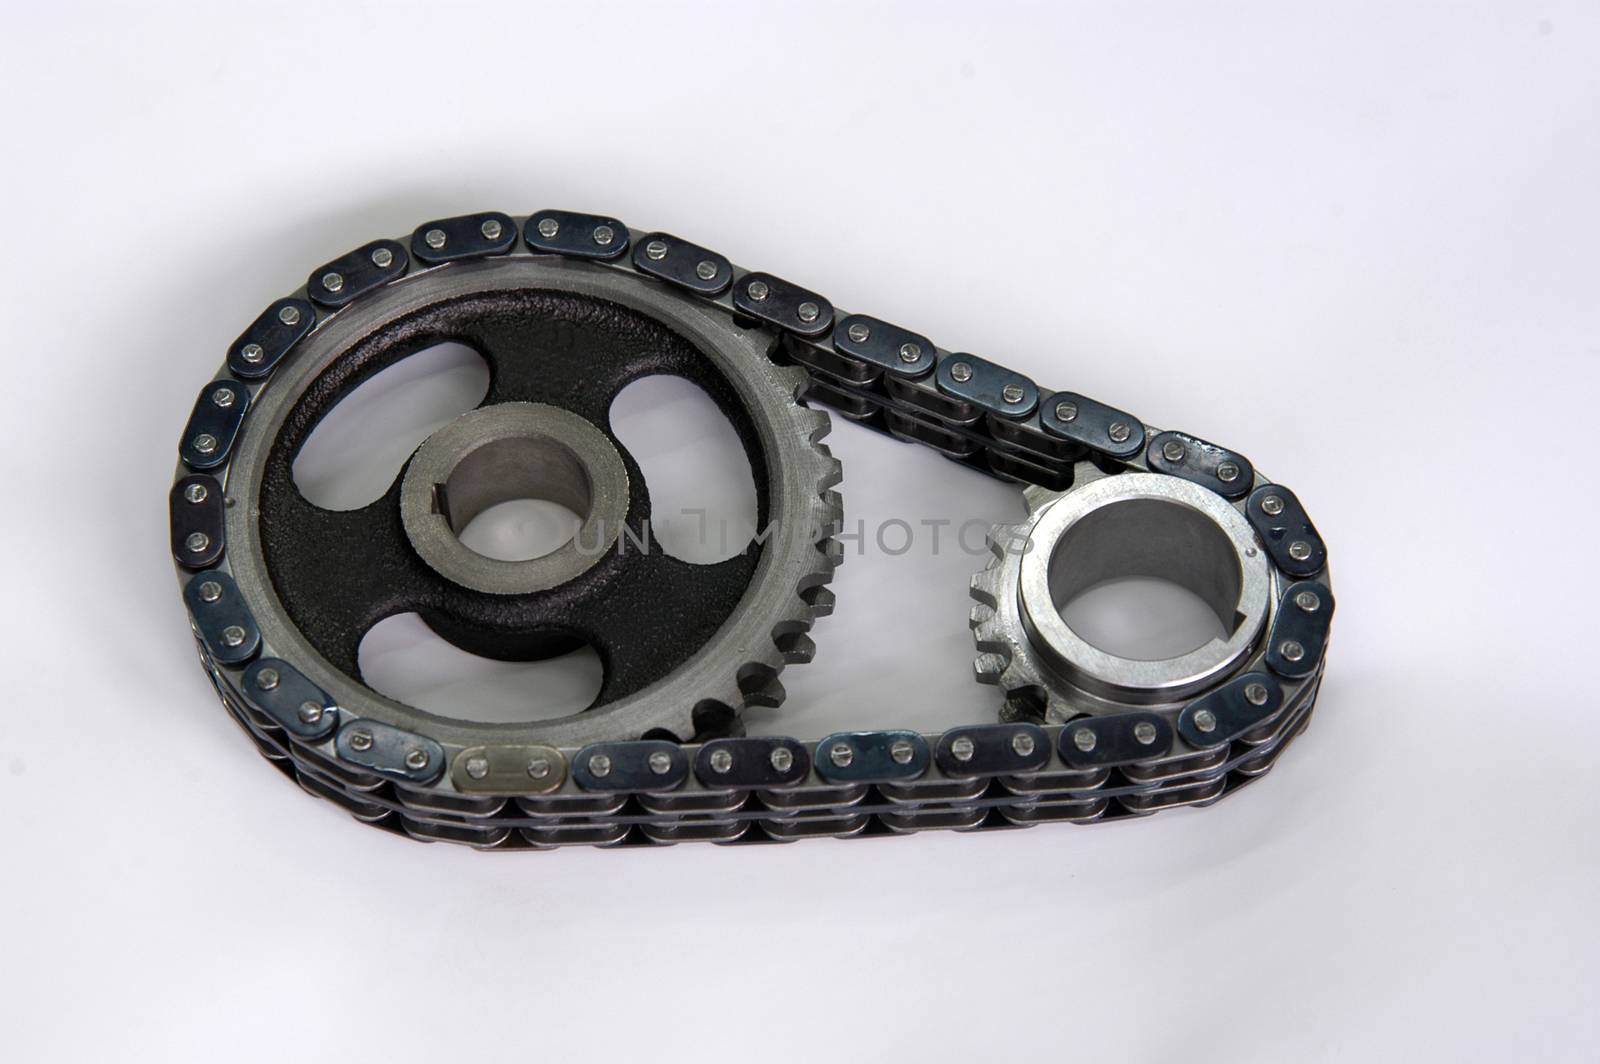 chain and two sprockets from car engine